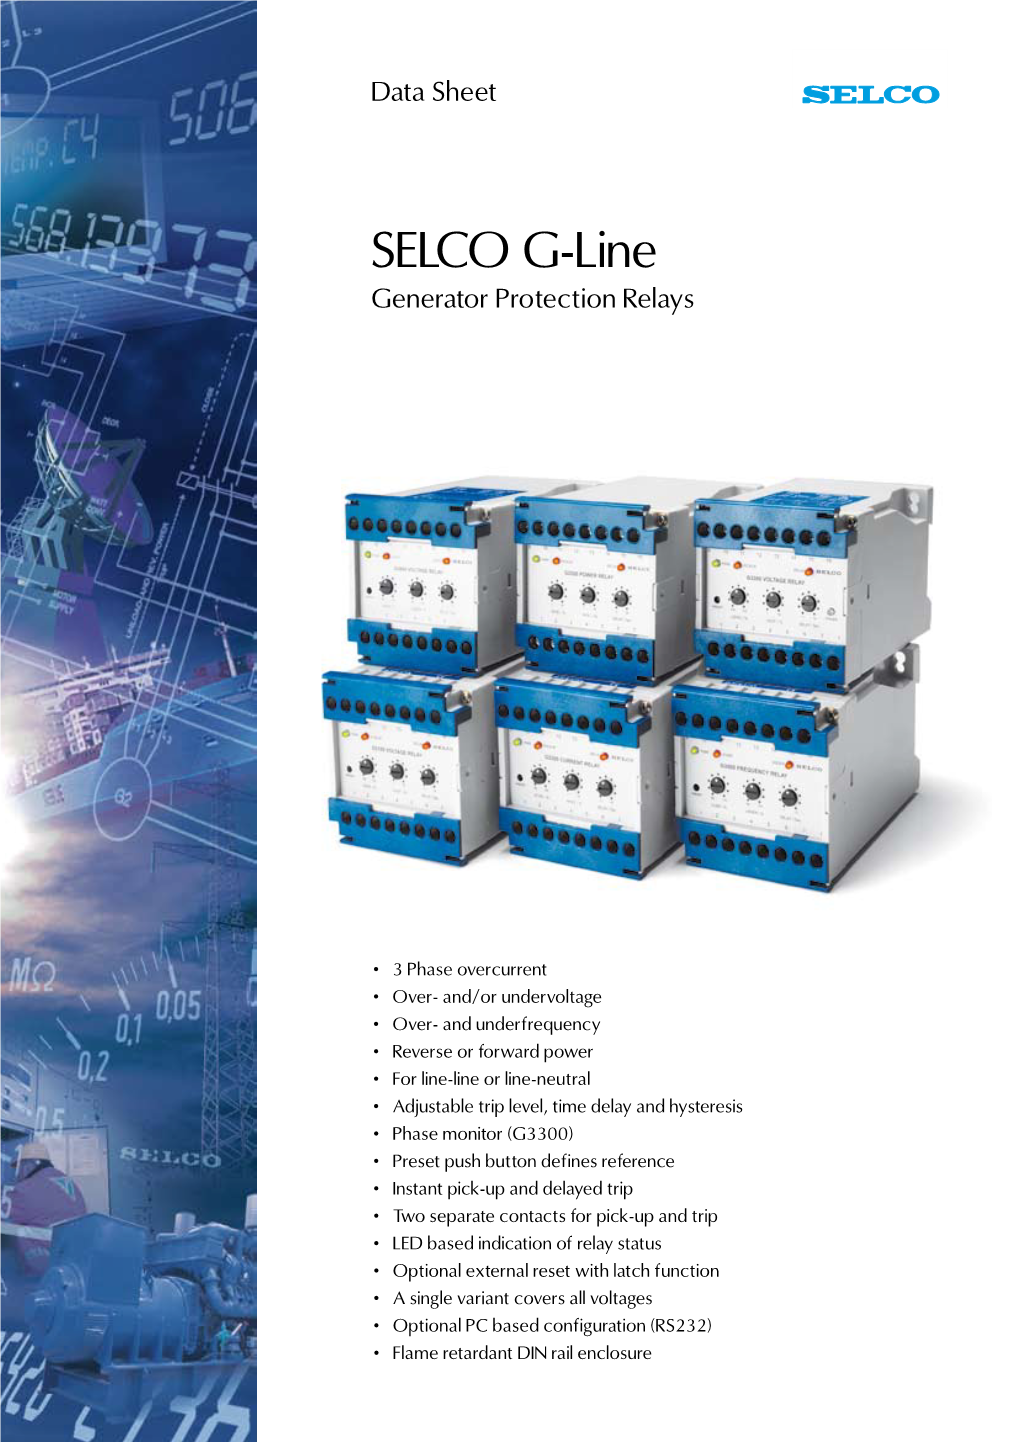 SELCO G-Line Generator Protection Relays